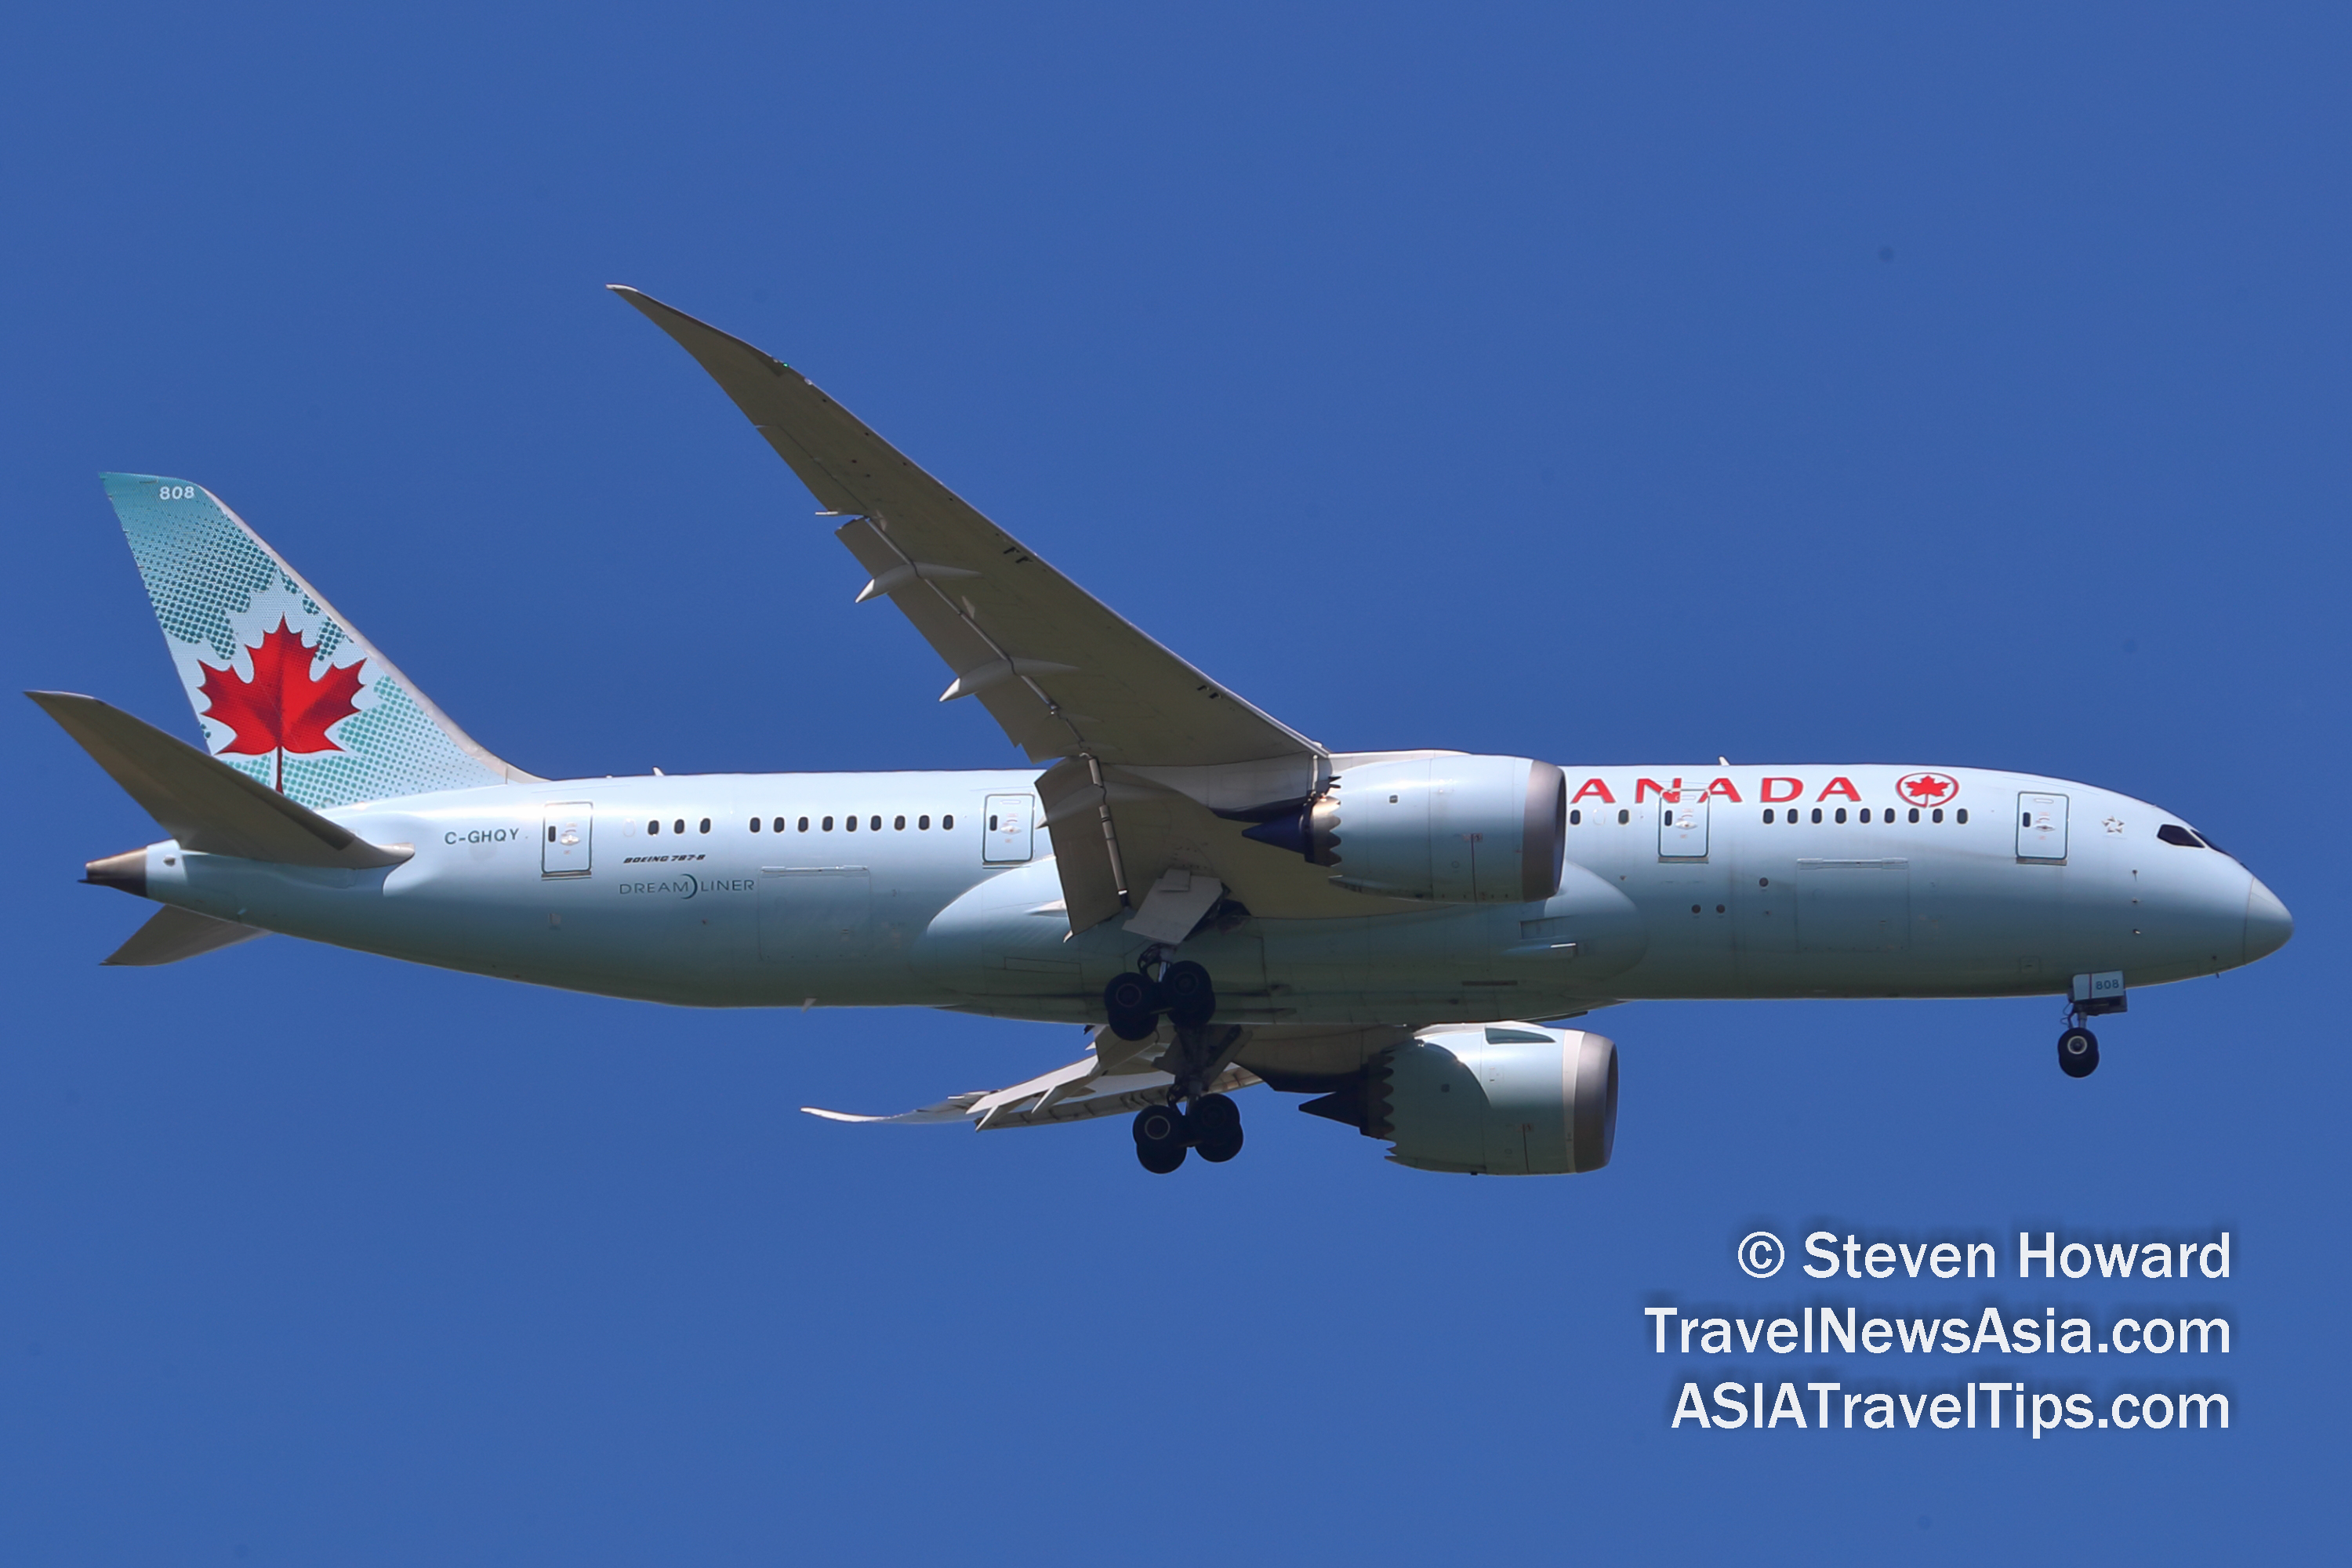 Air Canada Boeing 787-8 reg: C-GHQY. Picture by Steven Howard of TravelNewsAsia.com Click to enlarge.